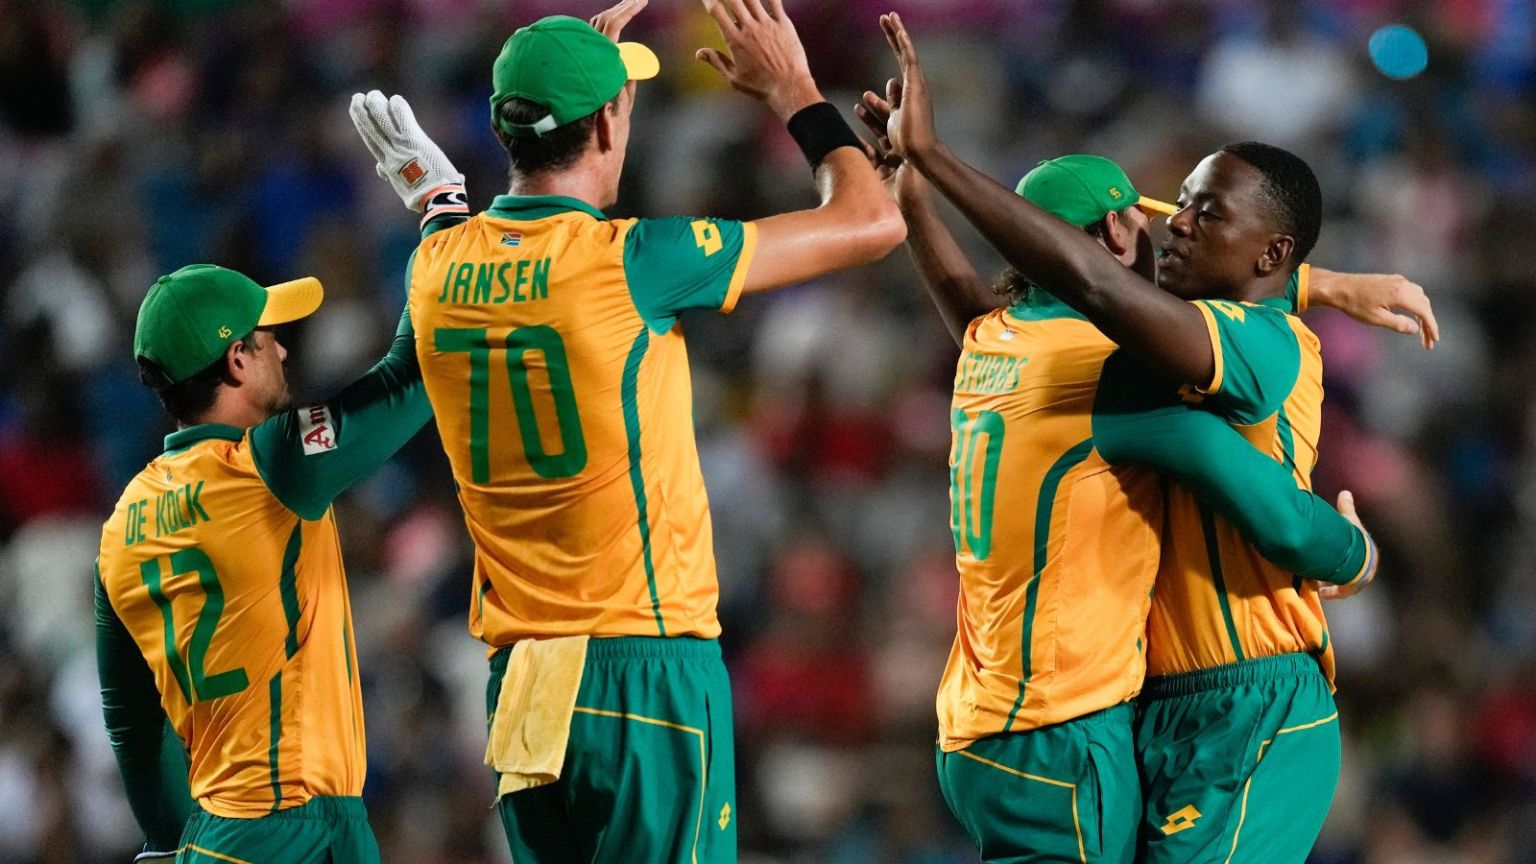 South Africa's Kagiso Rabada, right, is congratulated by teammates after dismissing Afghanistan's Ibrahim Zadran during the men's T20 World Cup semi-final cricket match between Afghanistan and South Africa at the Brian Lara Cricket Academy in Tarouba, Trinidad and Tobago, 